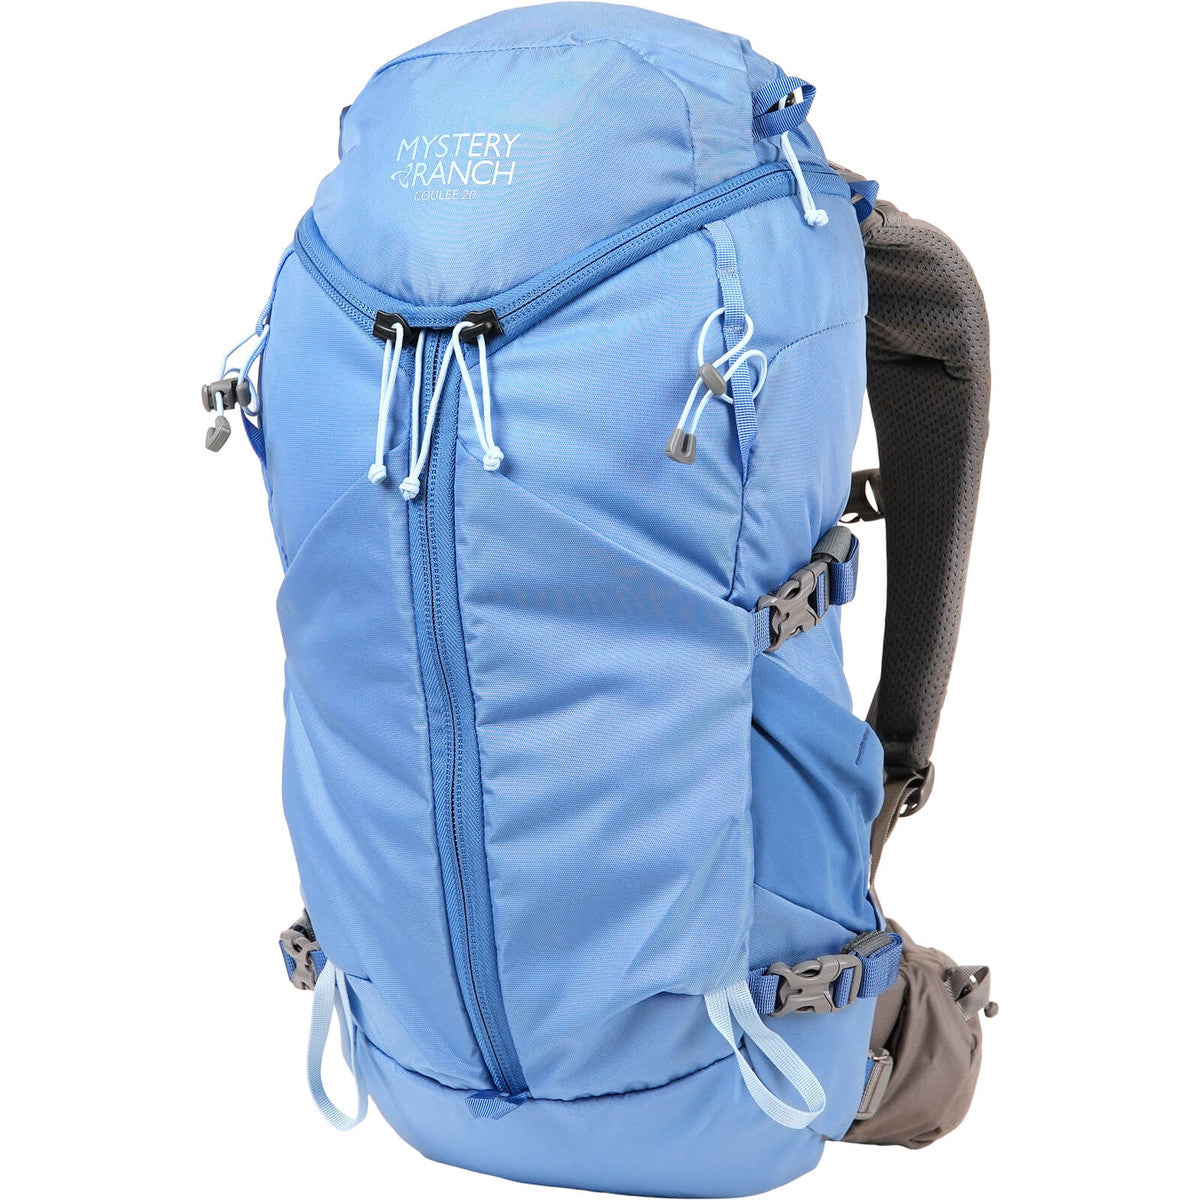 Mystery Ranch Coulee 20 Backpack Atlantic Wmn M/L